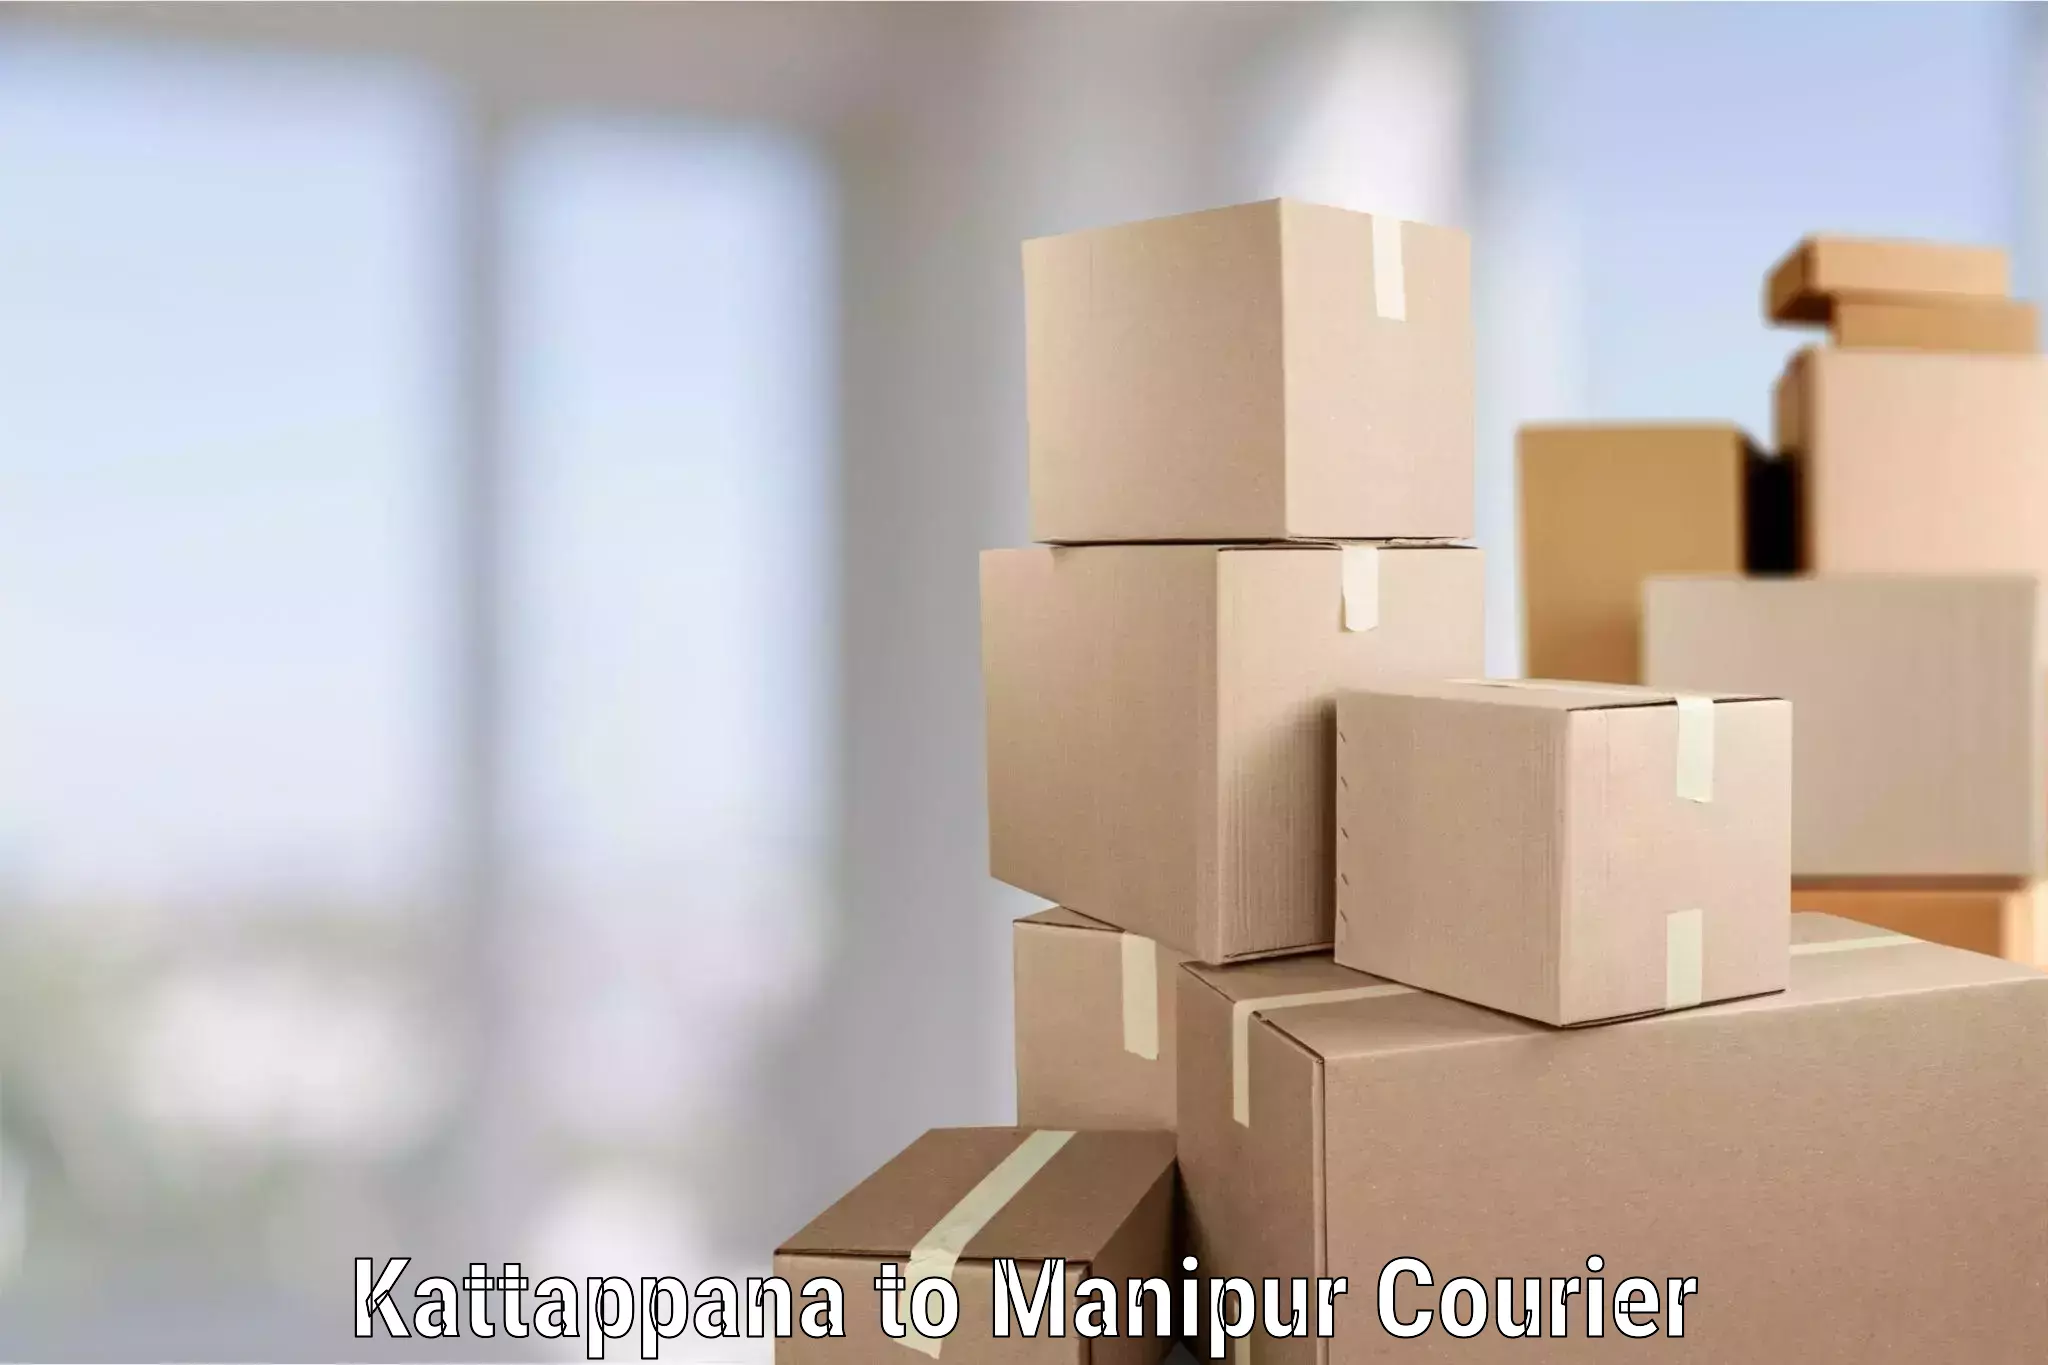 Furniture delivery service Kattappana to Imphal